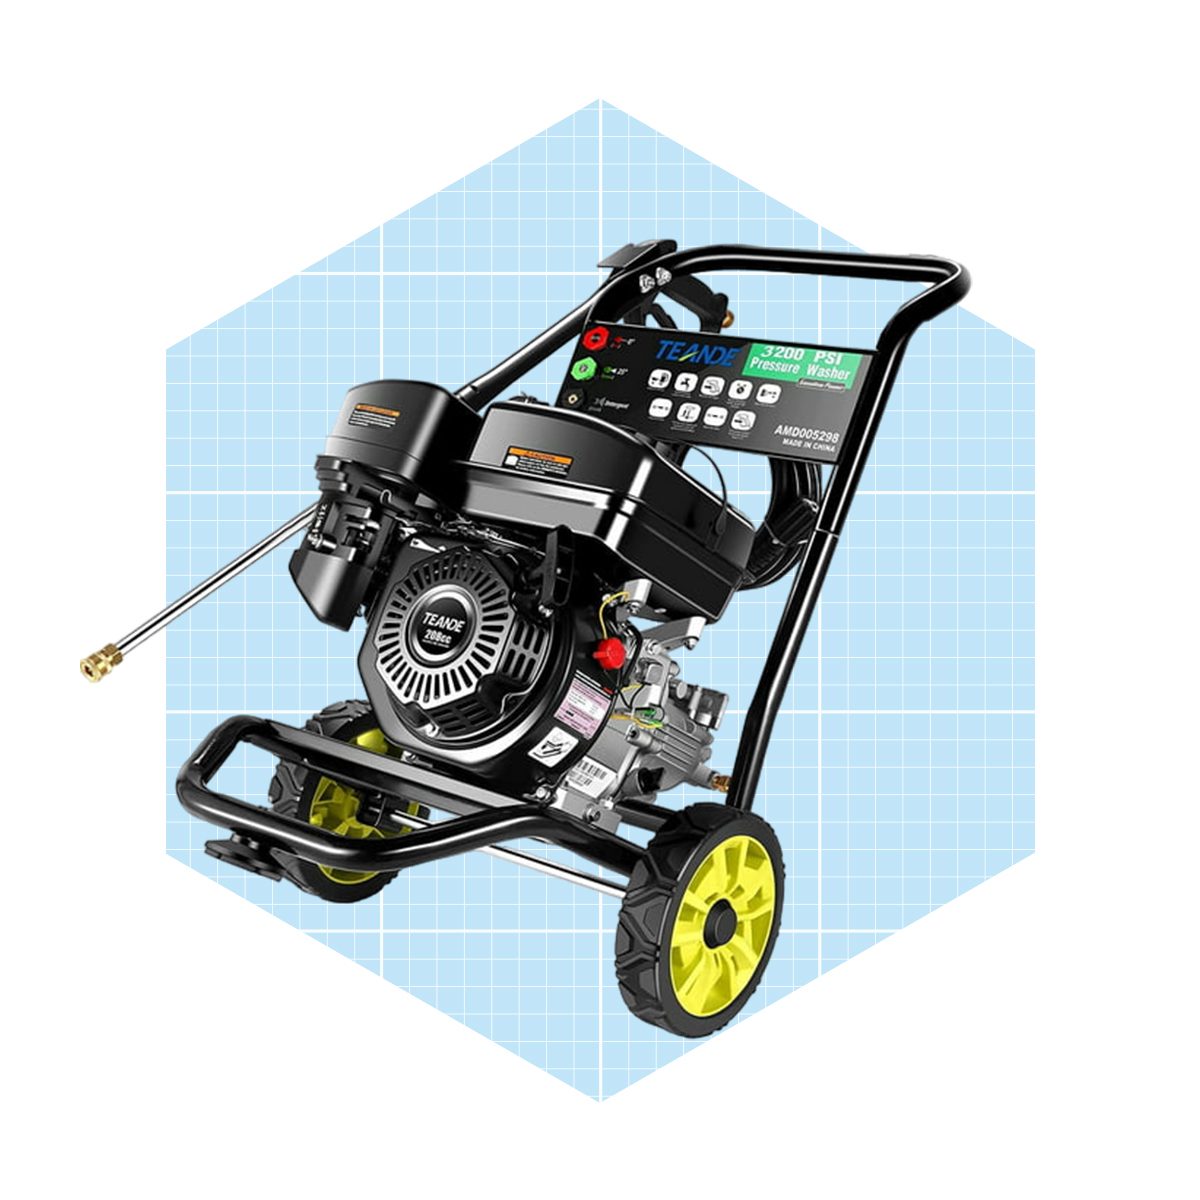 6 Best Gas Pressure Washers 2023 For Home, Car and More